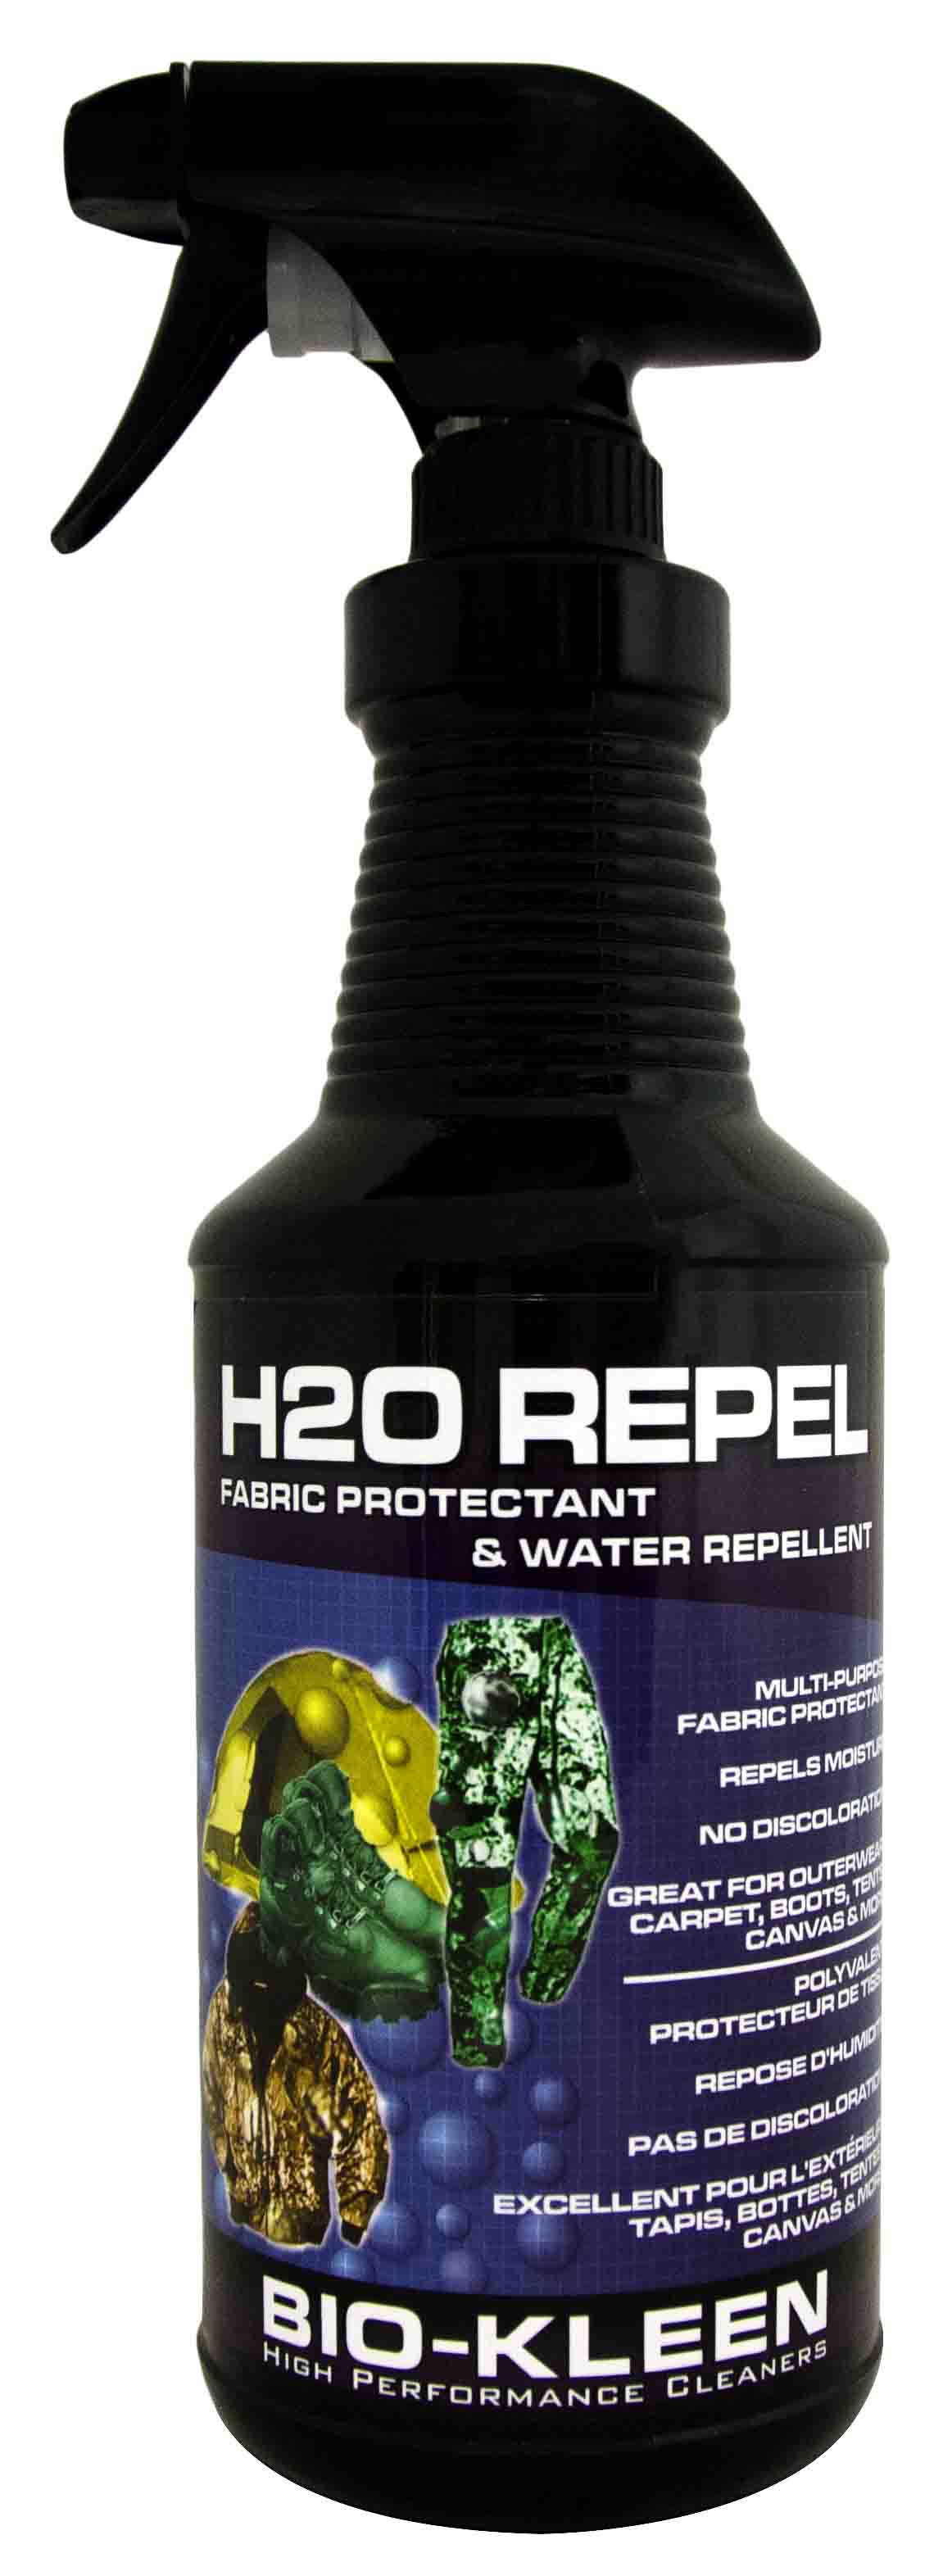 https://www.biokleen.com/resize/Shared/Images/Product/H2O-Repel-Water-Repellent/M01292-H2O-Repel-32oz.jpg?bw=1000&w=1000&bh=1000&h=1000